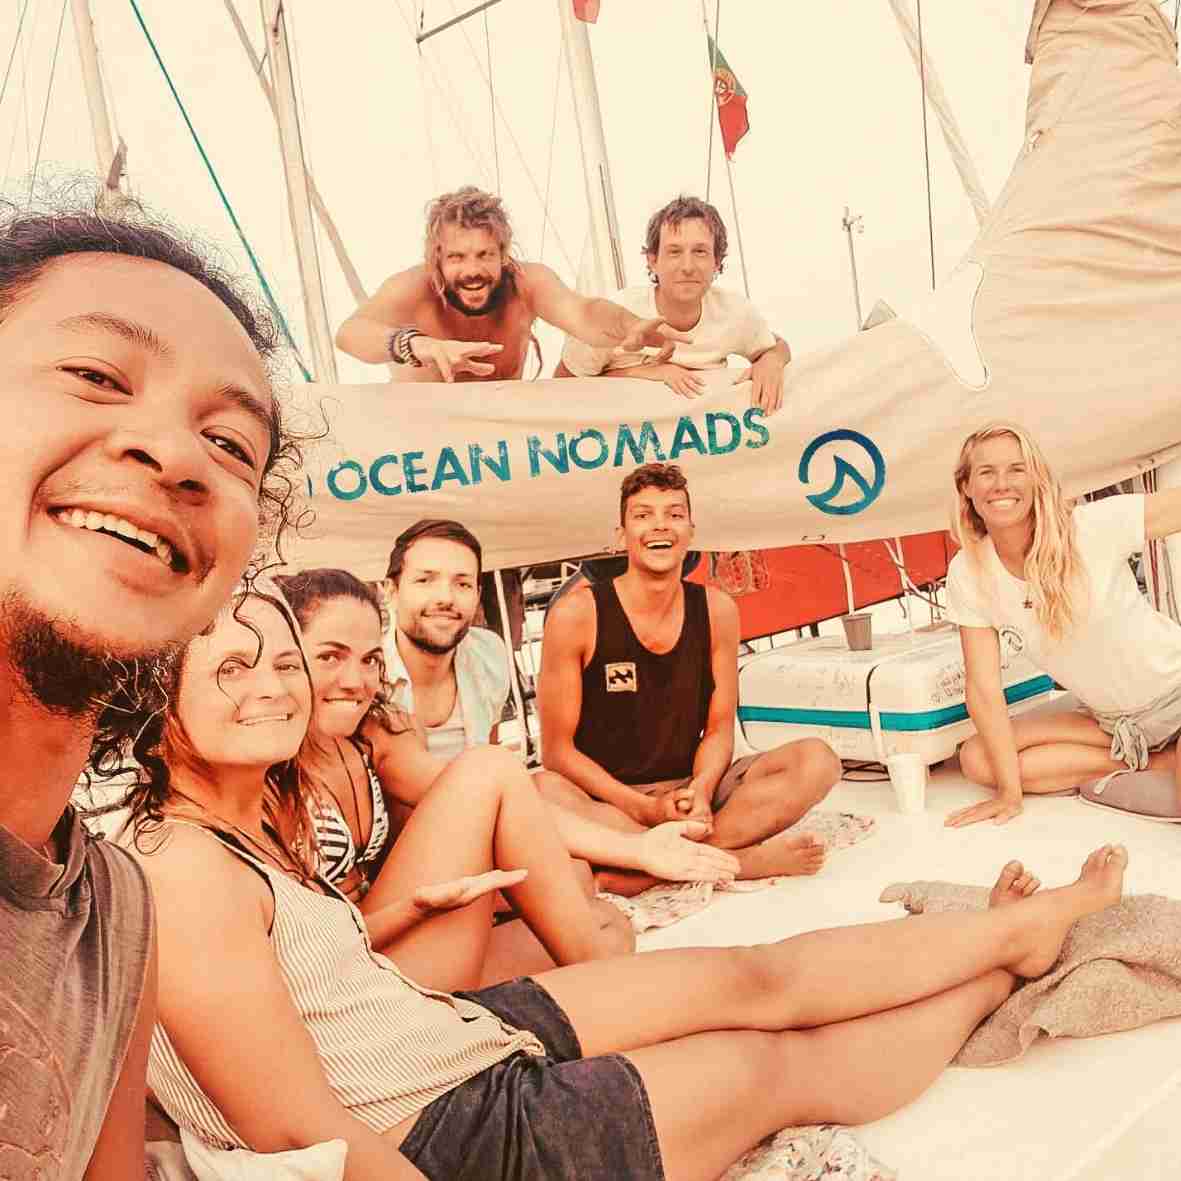 a group of people sitting on a boat with ocean nomads written on it.